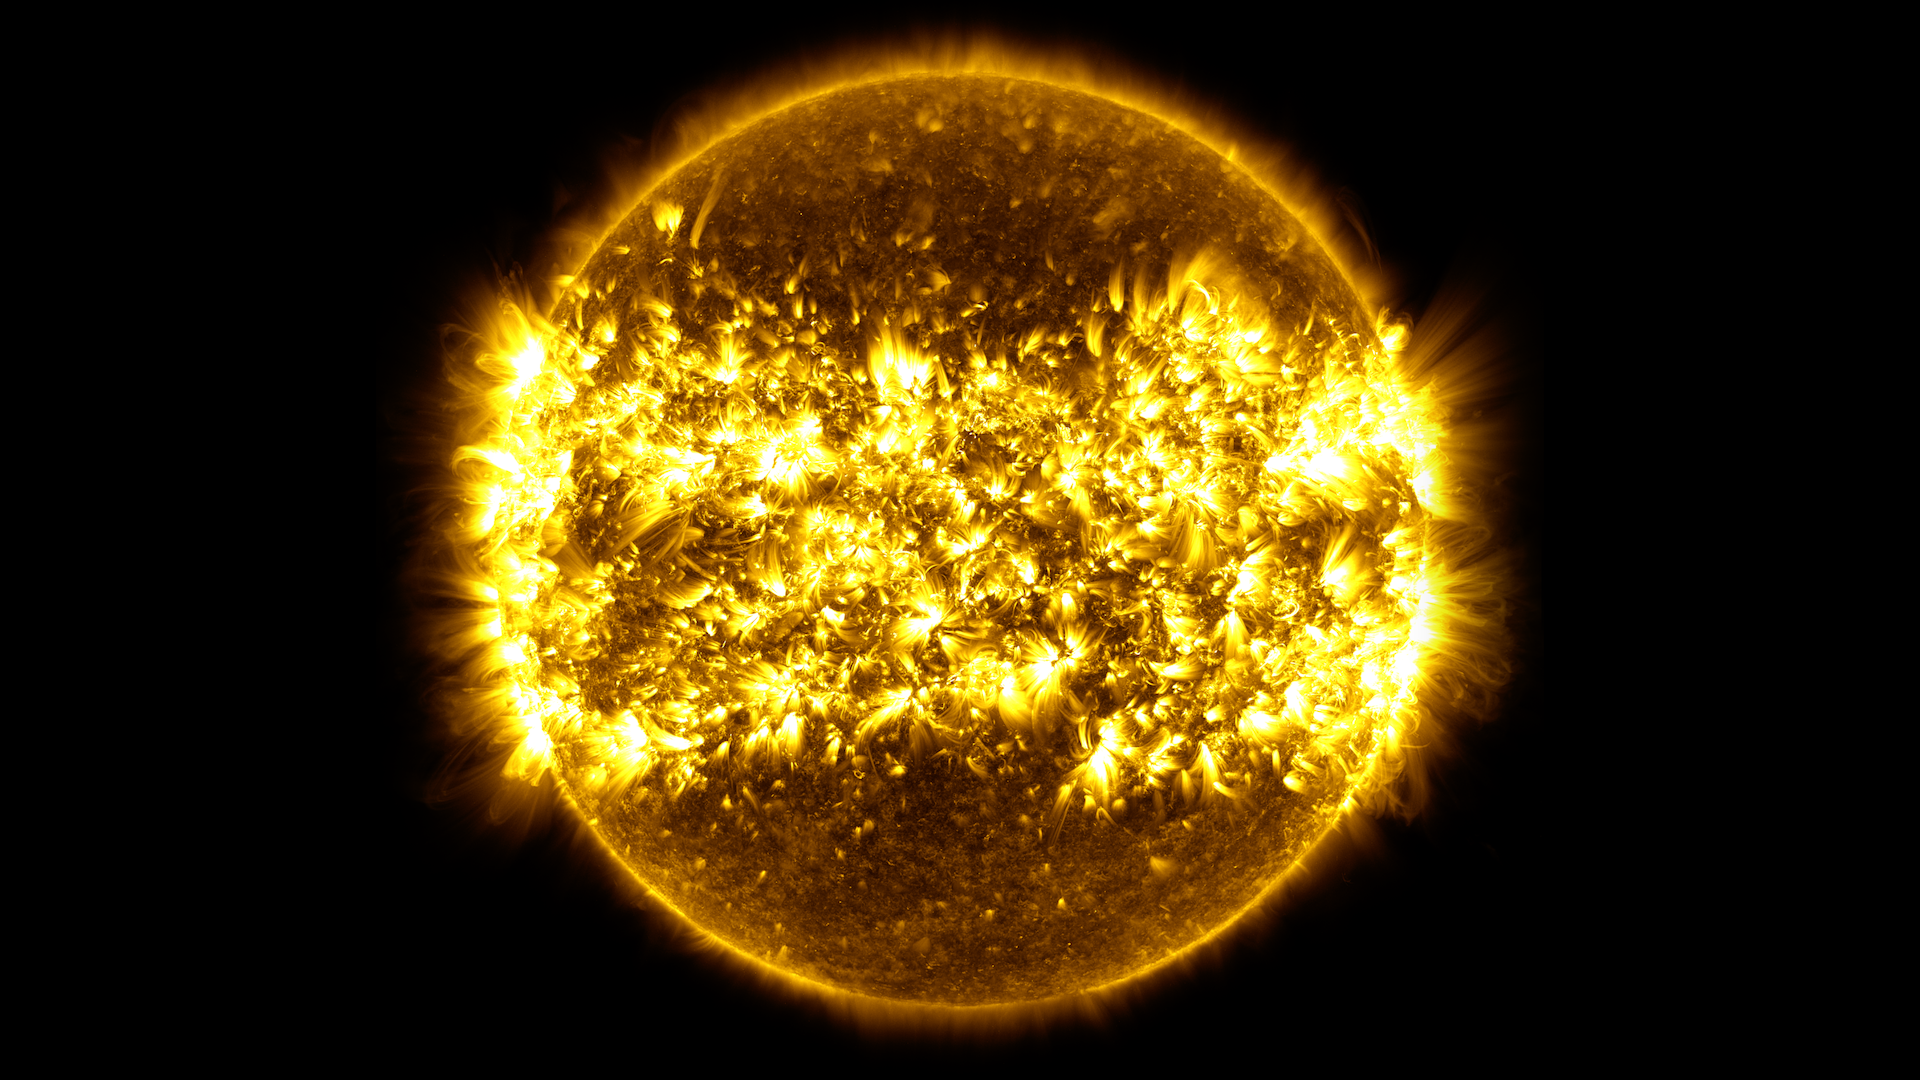 This ultra-high definition (3840x2160) video shows the sun in the 171 angstrom wavelength of extreme ultraviolet light. It covers a time period of January 2, 2015 to January 28, 2016 at a cadence of one frame every hour, or 24 frames per day.  This timelapse is repeated with narration by solar scientist Nicholeen Viall and contains close-ups and annotations. 171 angstrom light highlights material around 600,000 Kelvin and shows features in the upper transition region and quiet corona of the sun. The video is available to download here at 59.94 frames per second, double the rate YouTube currently allows for UHD content.  The music is titled "Tides" and is from Killer Tracks.Watch this video on the NASA Goddard YouTube channel.Complete transcript available.